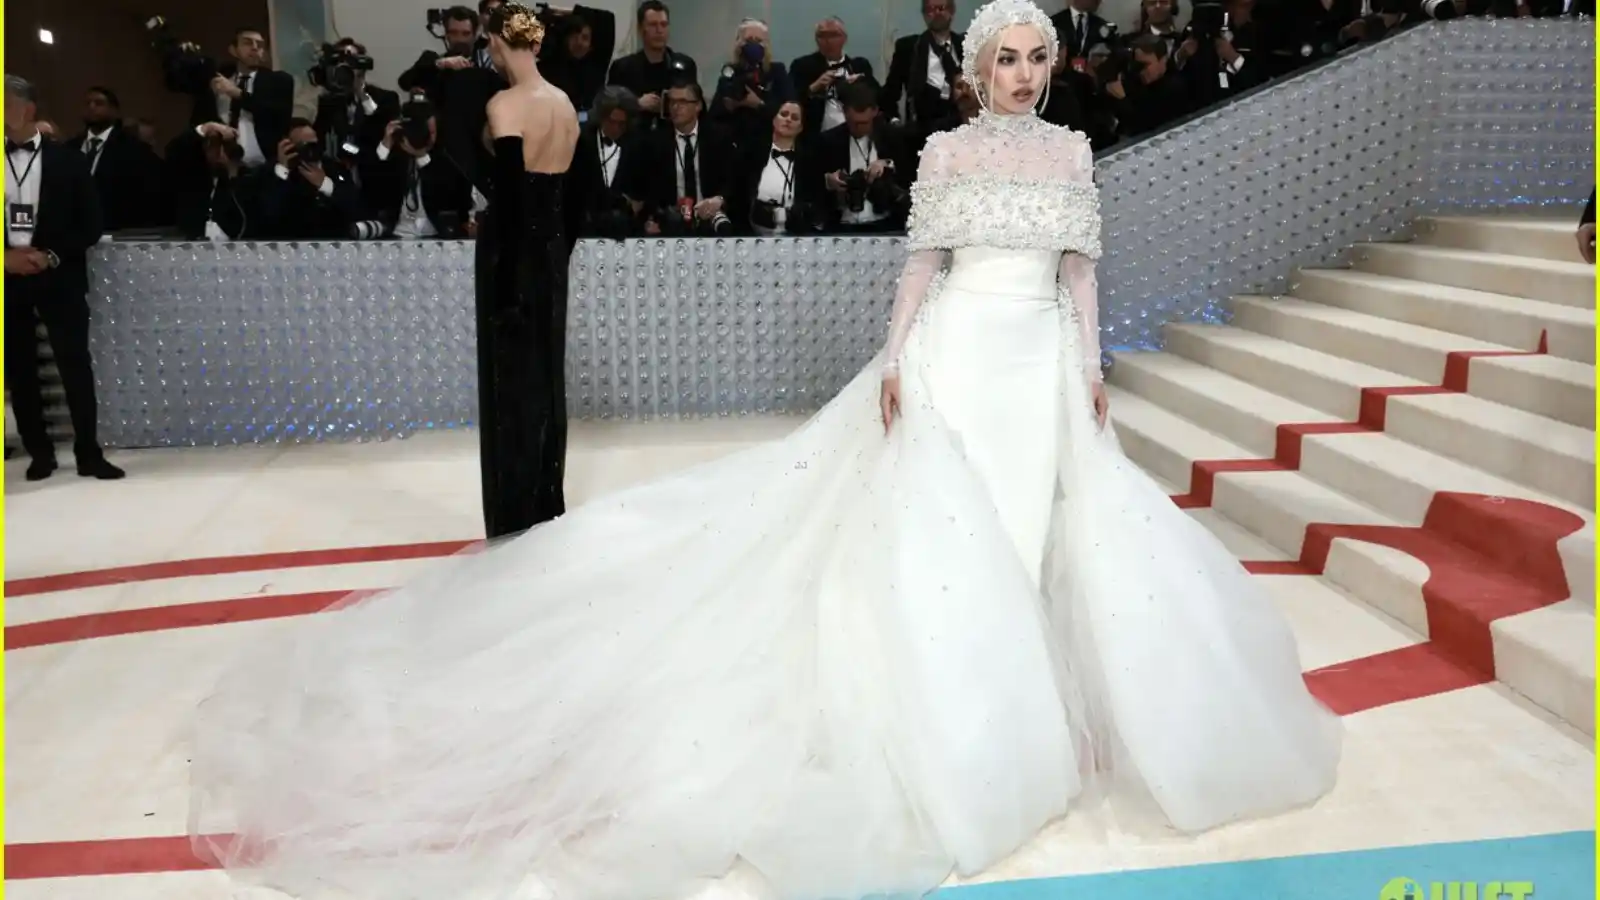 With the Christian Siriano dress, Ava Max made her Met Gala debut